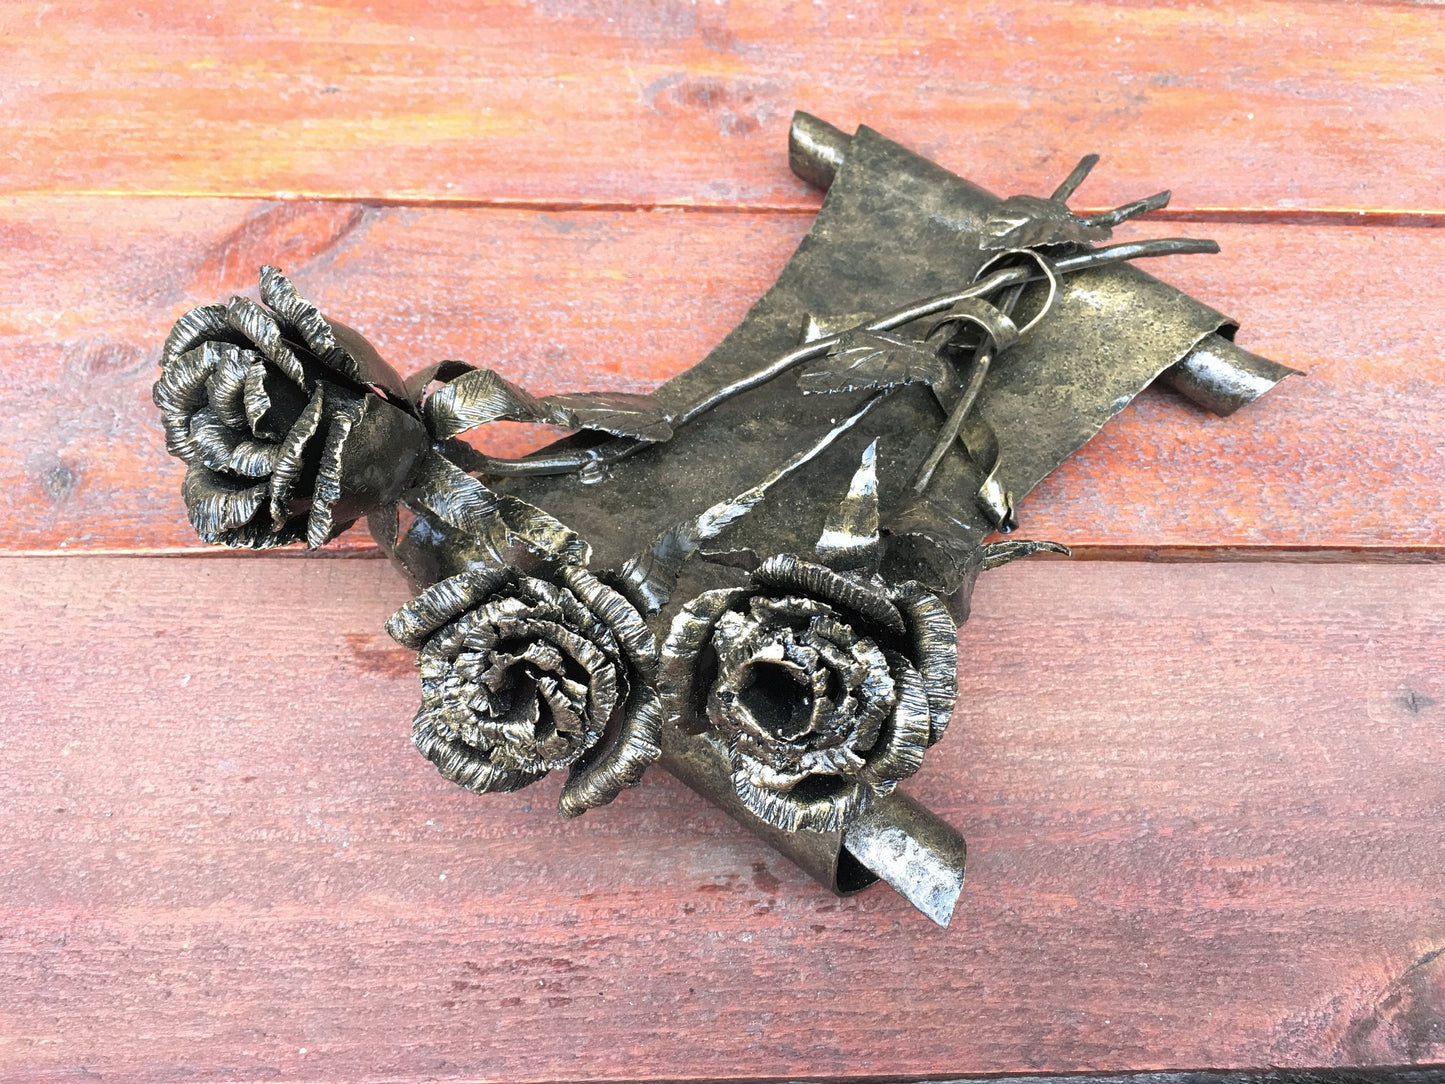 6th anniversary gift for her, iron anniversary gift for her, metal iron bouquet, iron rose, forged rose, iron gift, metal rose, iron gifts